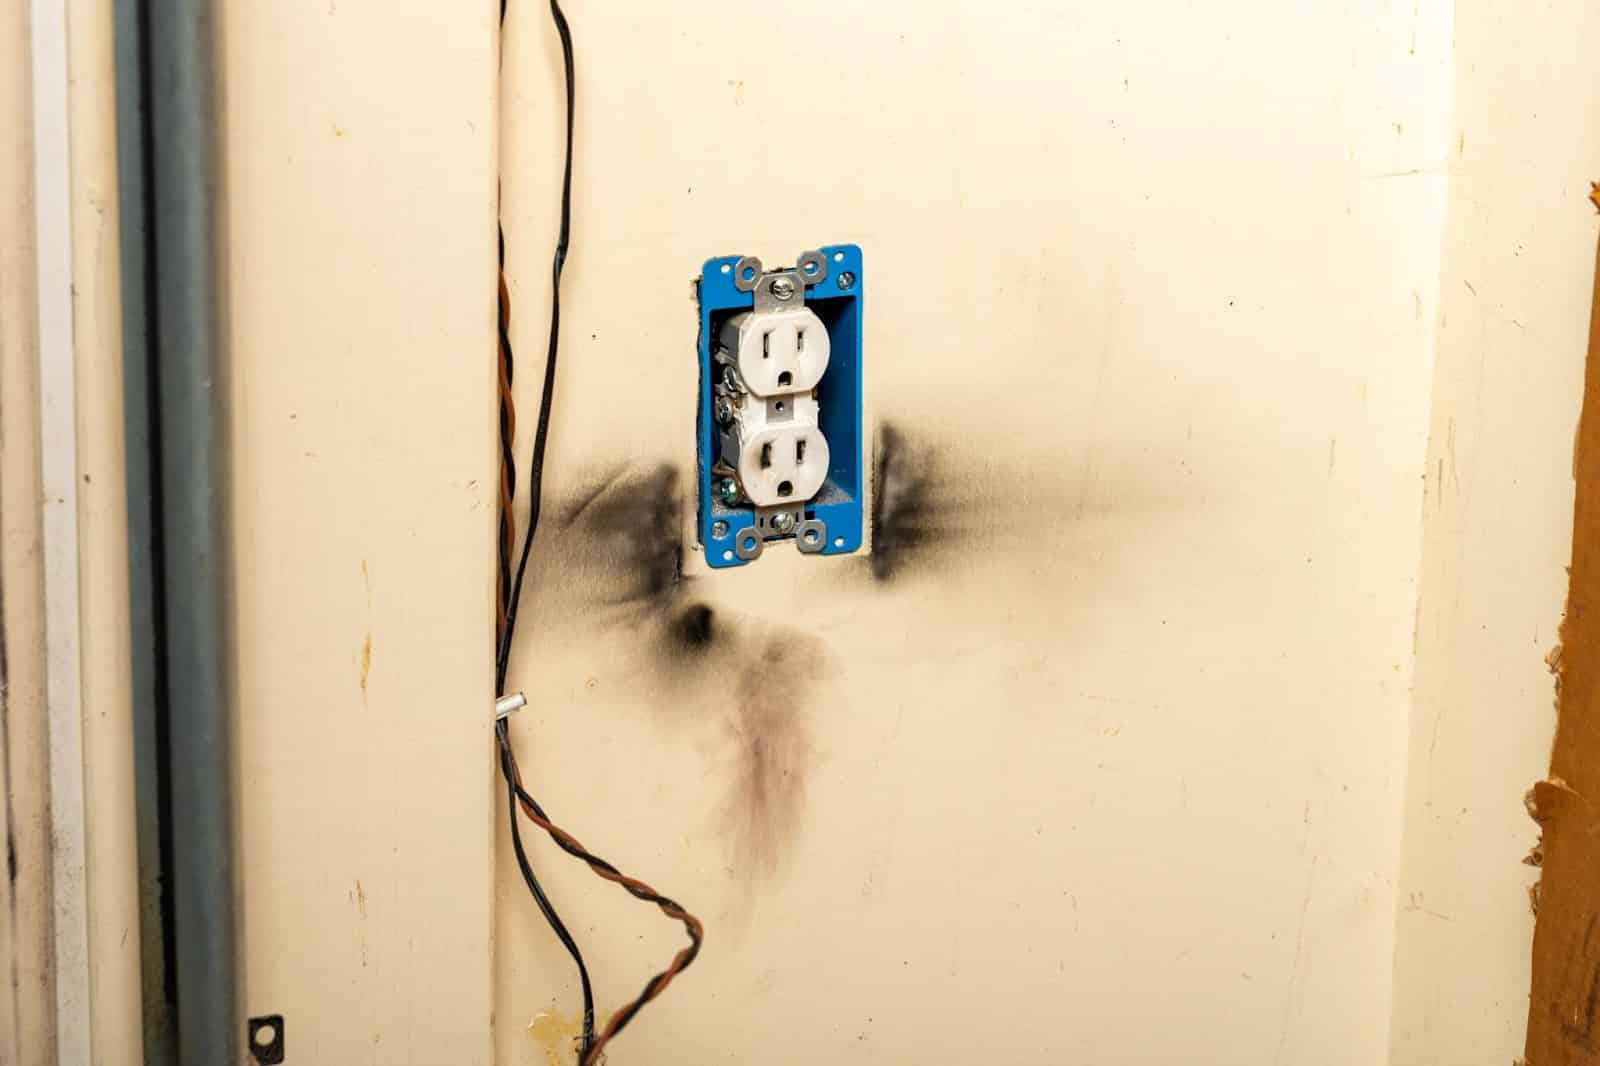 A wall with a blue outlet and a black electrical box, showing smoke damage, in need of smoke damage restoration.